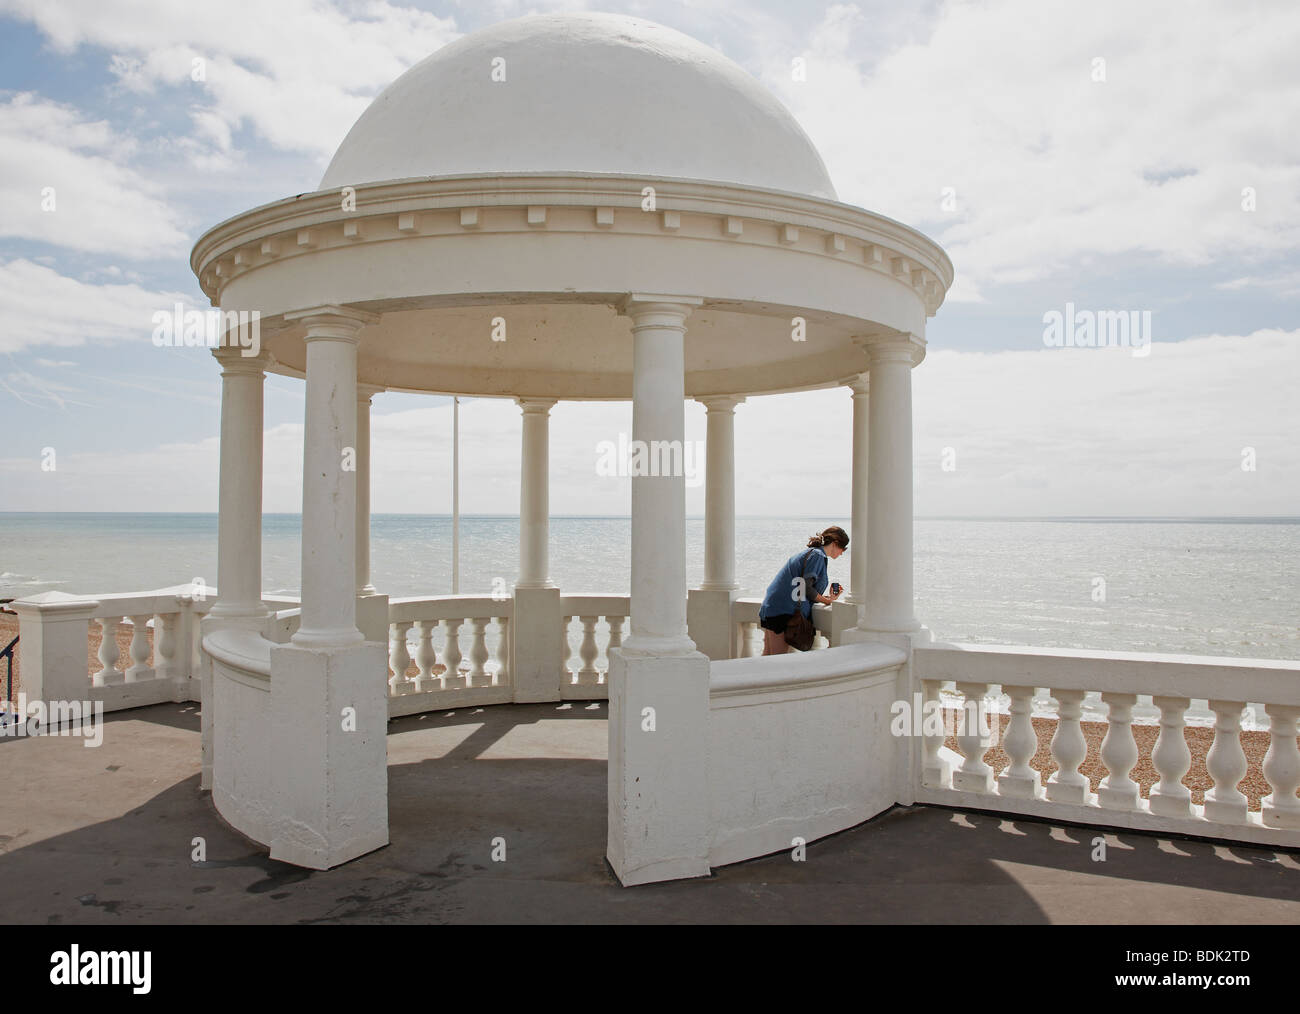 girl looking out to sea under Bexhill pavilion dome Stock Photo